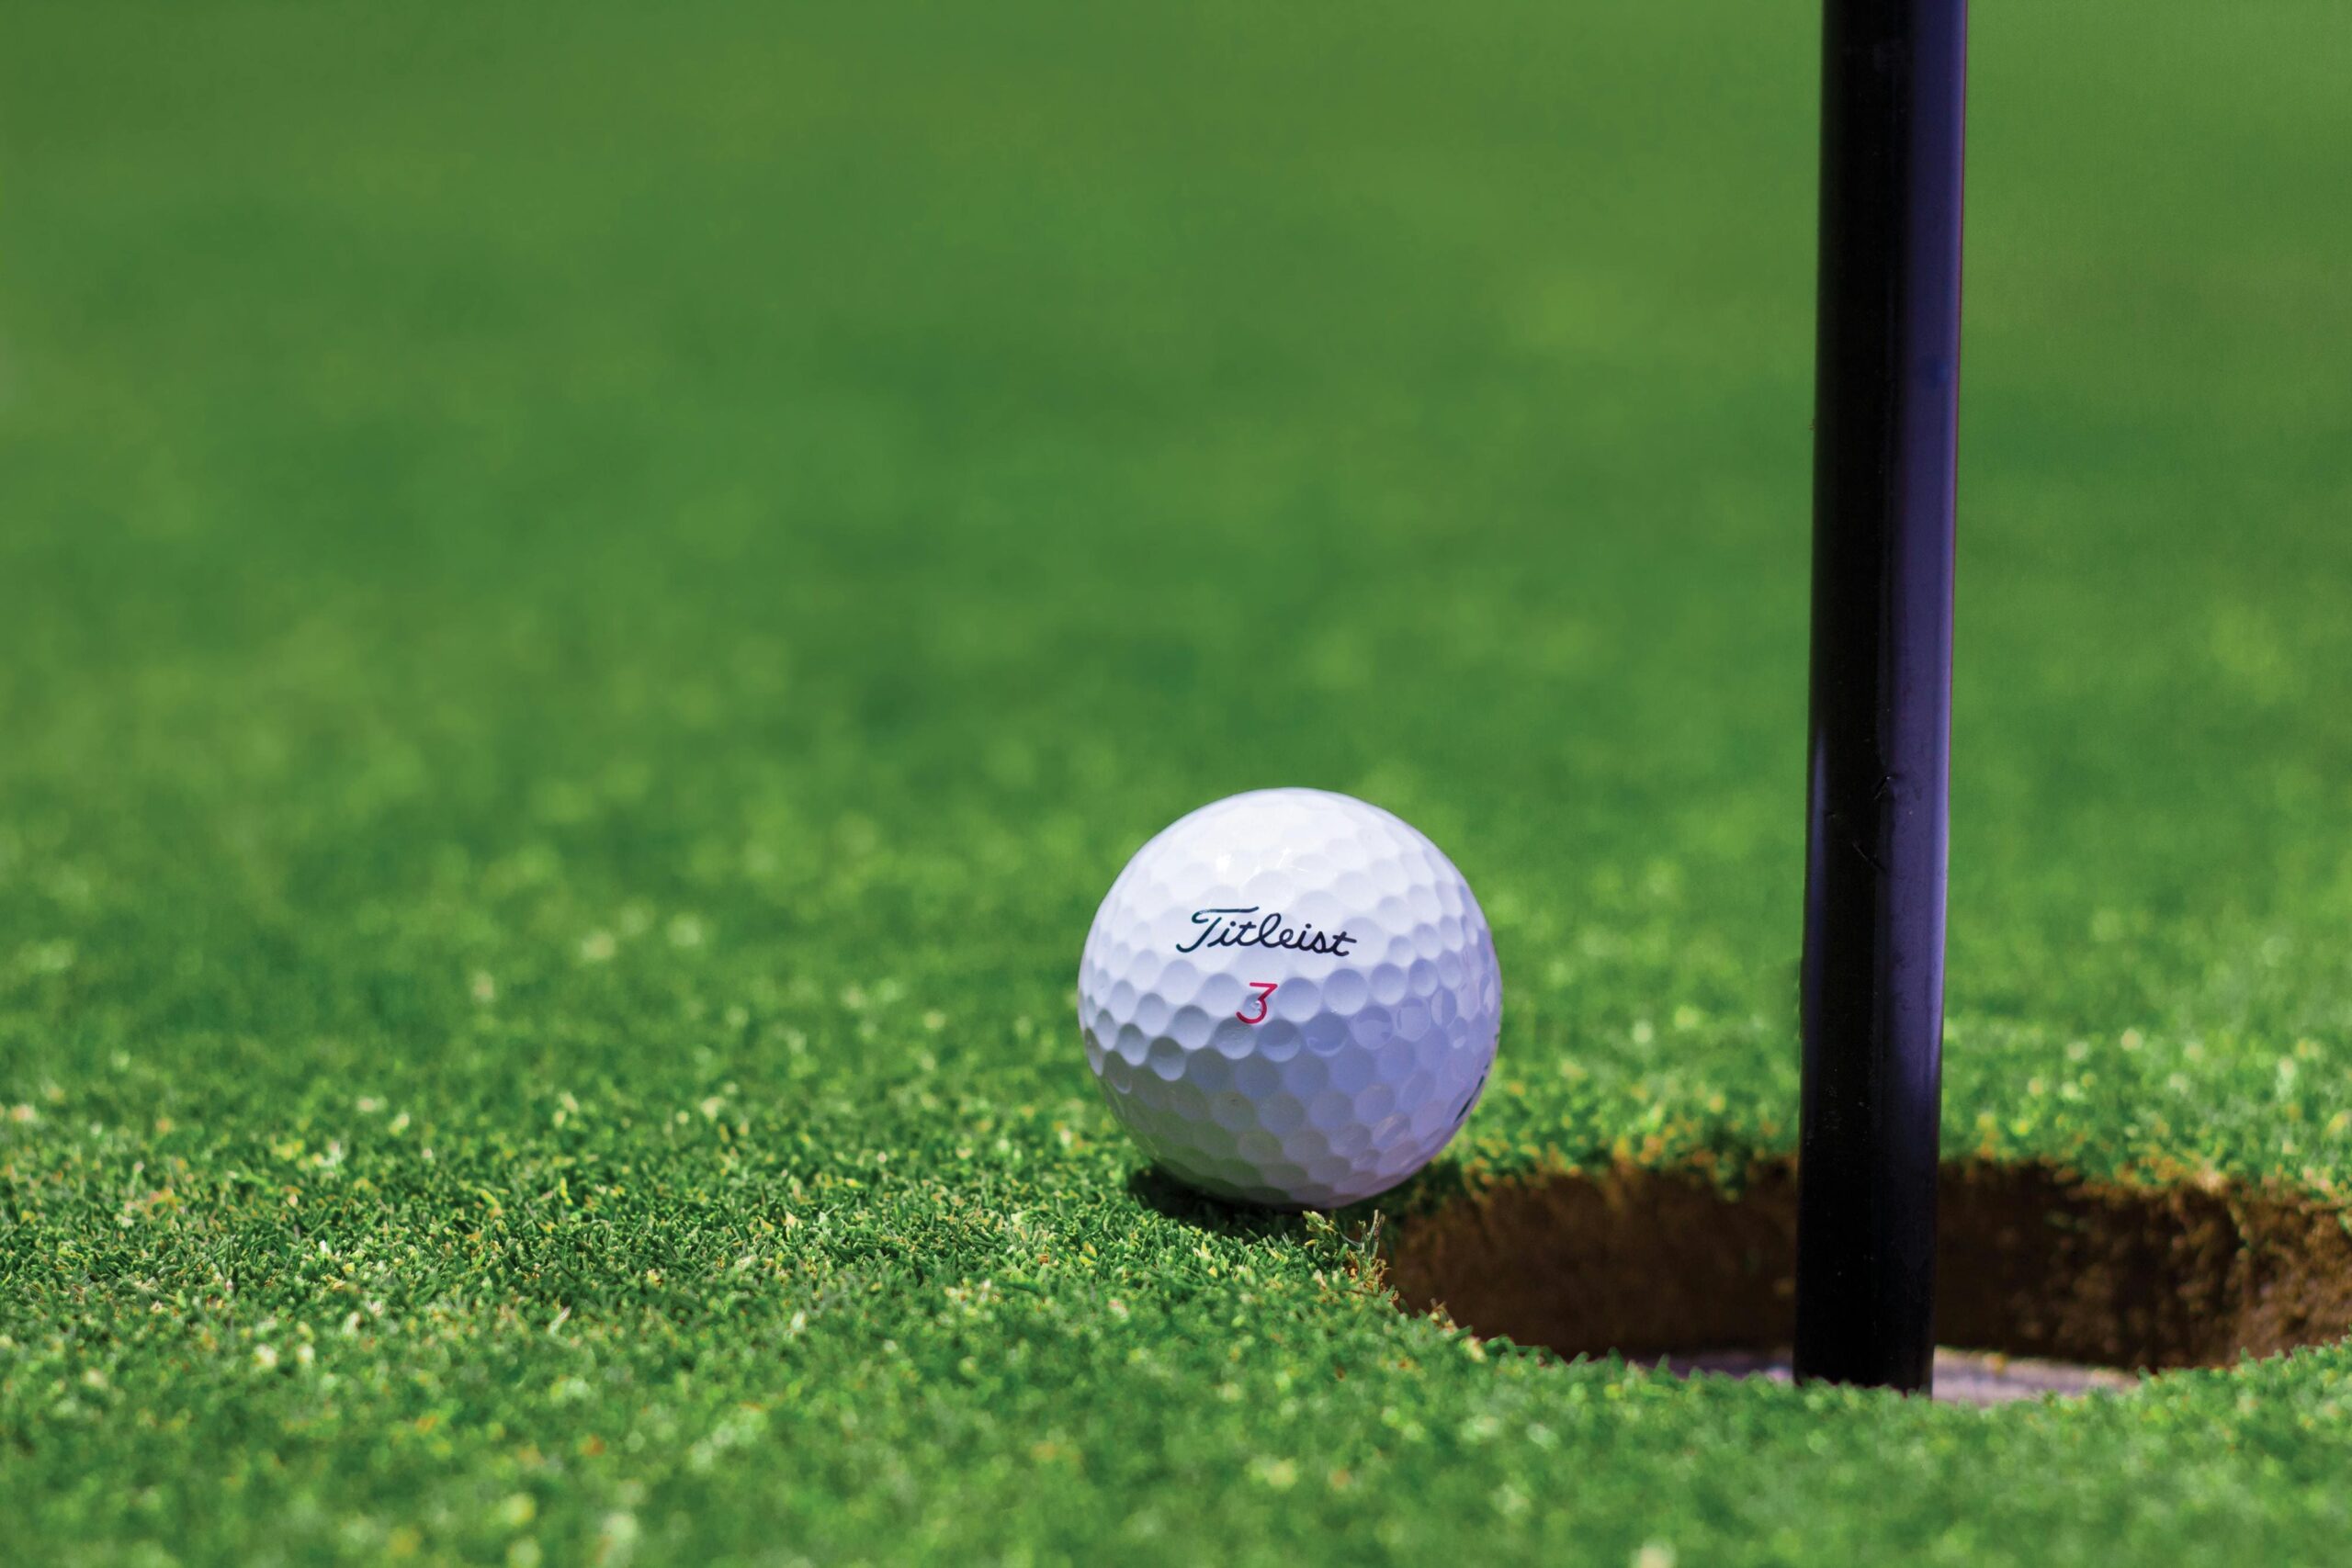 longest drive in golf - image of golf ball entering the hole